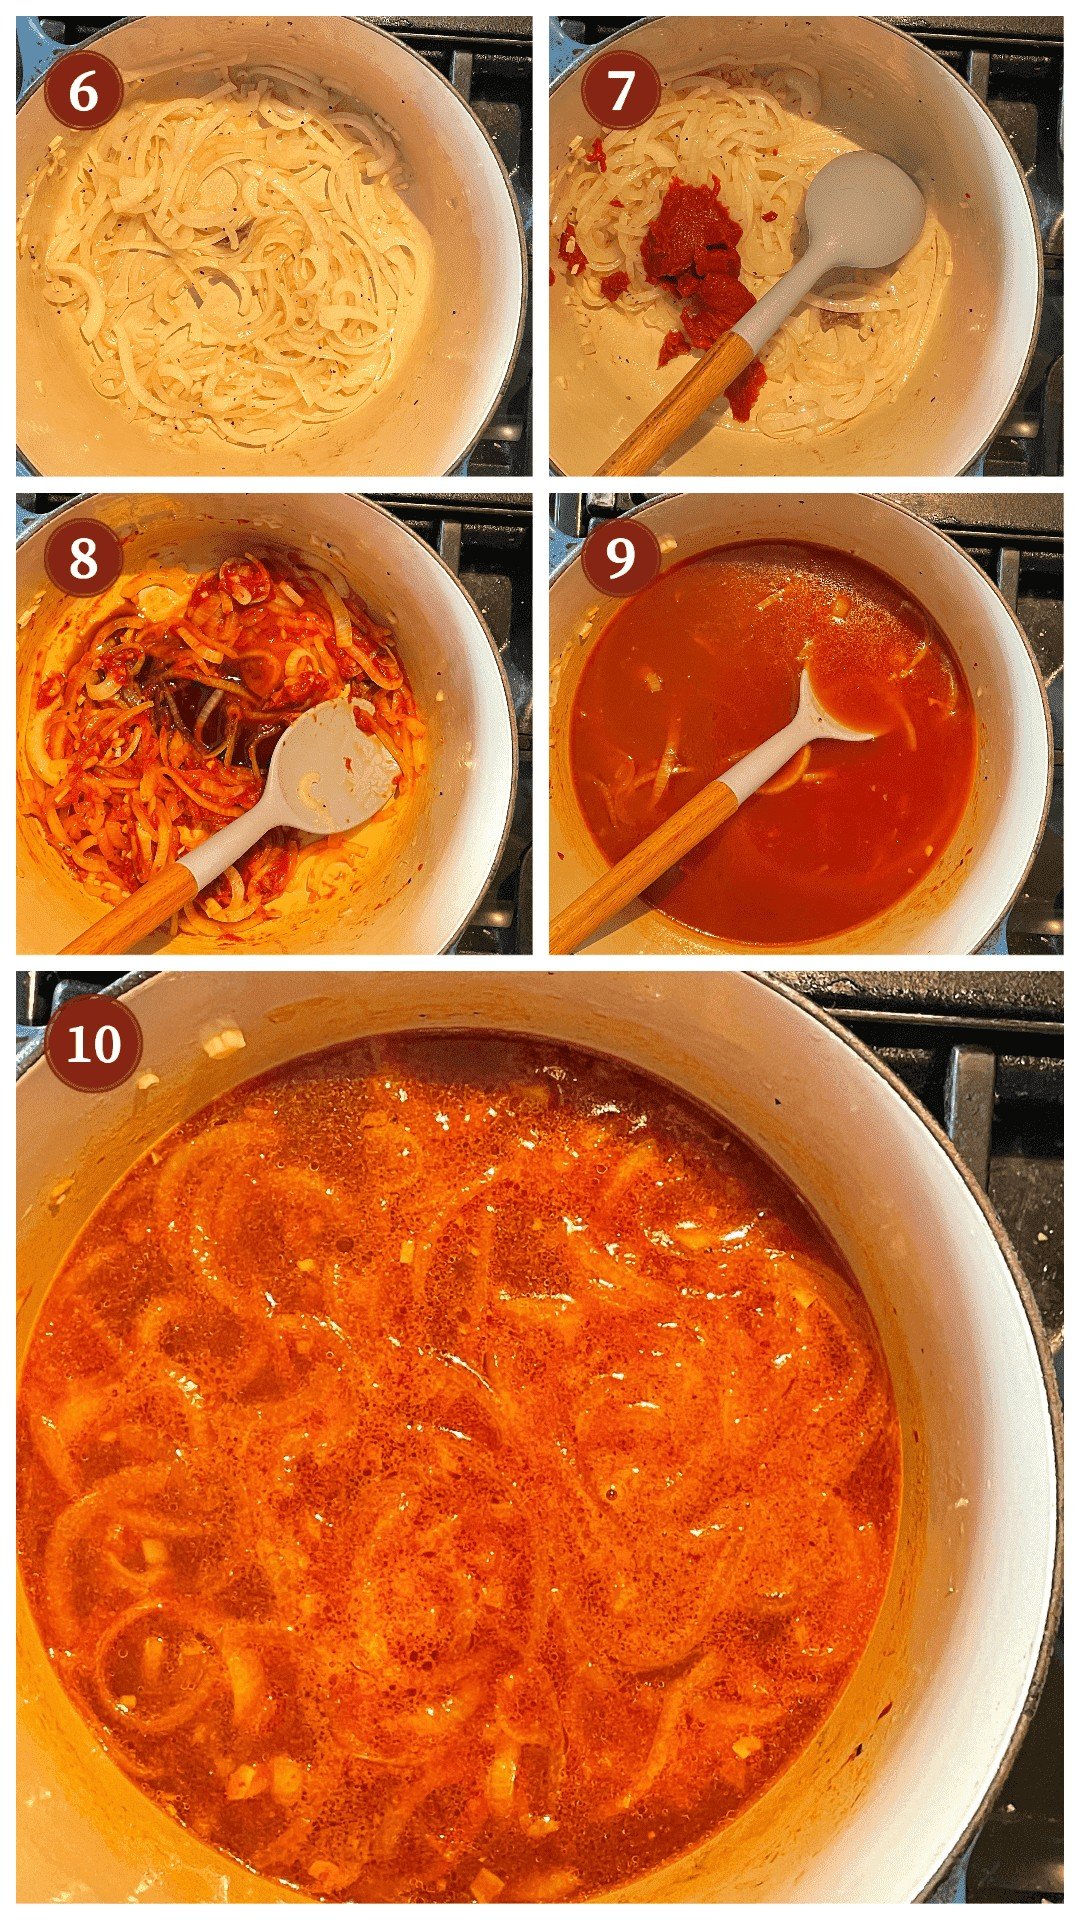 A collage of images showing how to cook roast beef debris, steps 6 - 10.